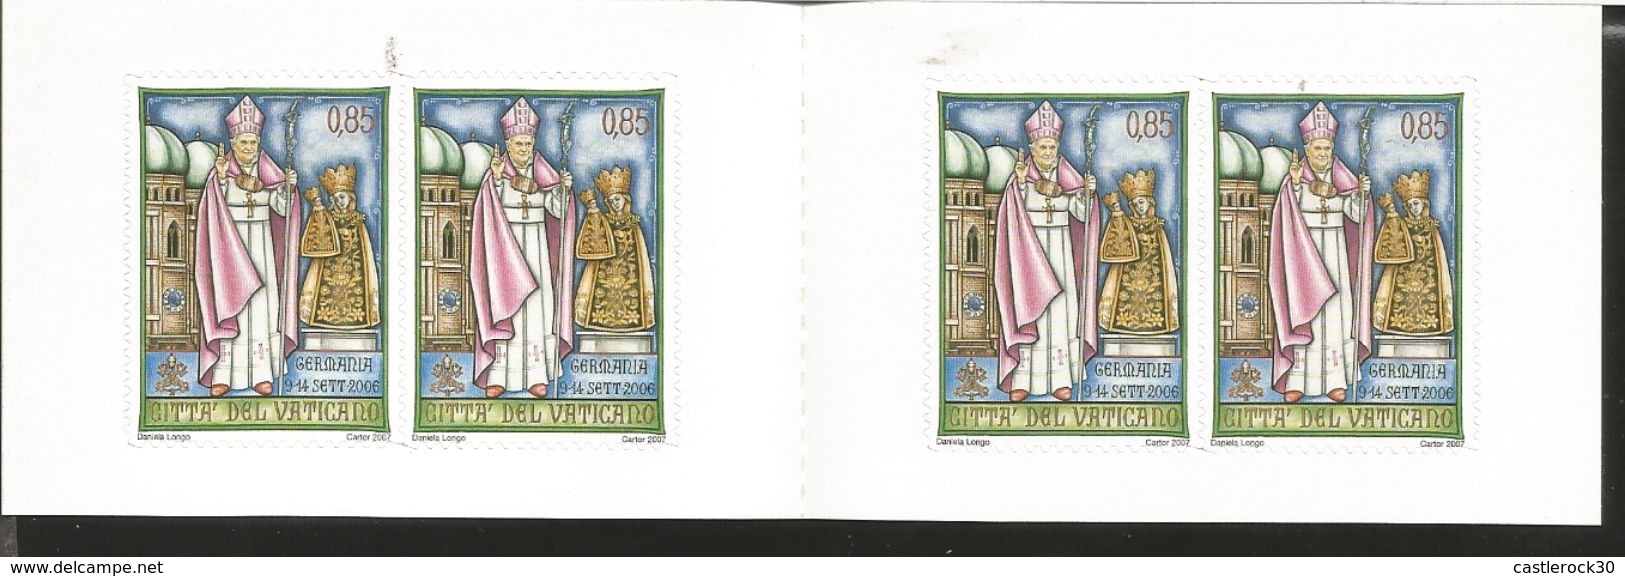 J) 2007 VATICAN CITY, BOOKLET, THE JOURNEYS OF THE HOLY FATHER IN THE WORLD, ADHESIVE STICKER, XF - Cartas & Documentos